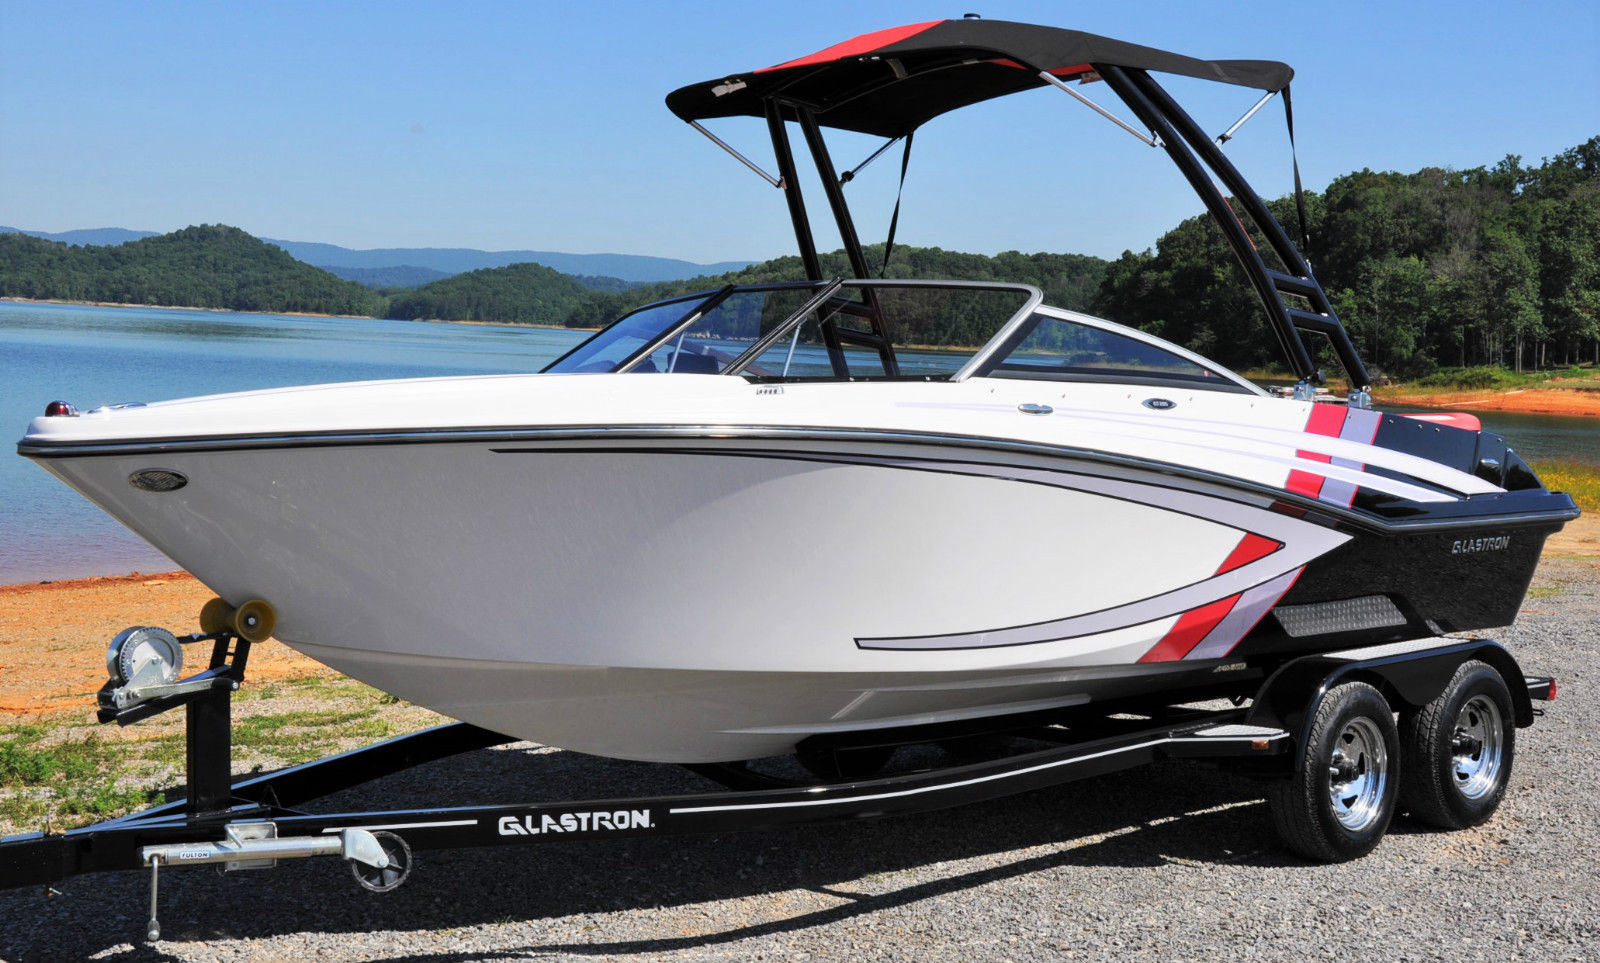 GLASTRON GTS205CB 2013 for sale for $250 - Boats-from-USA.com